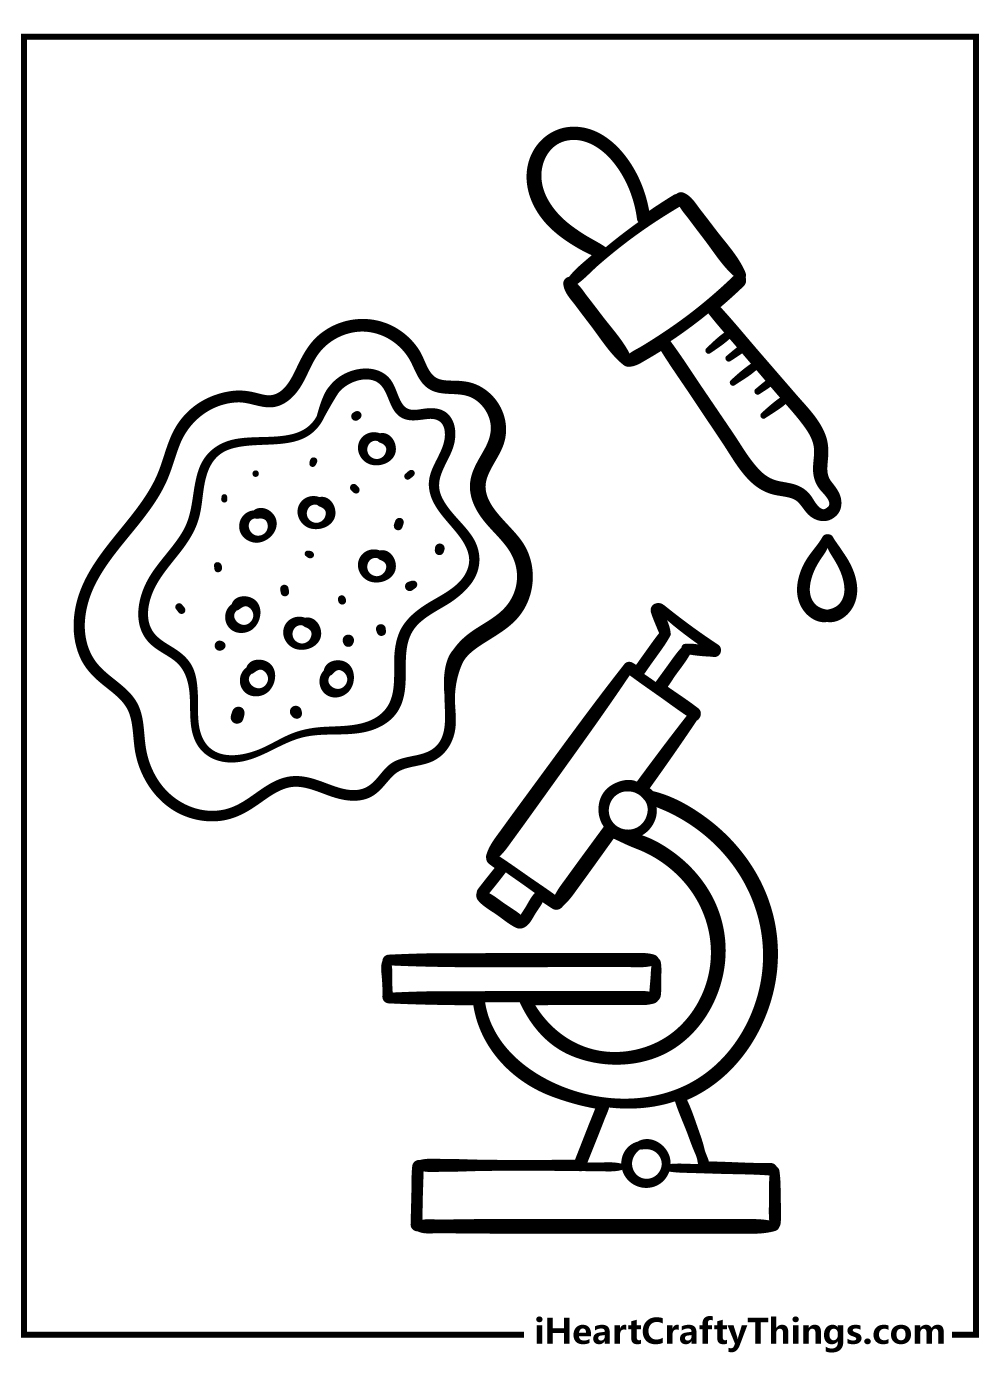 Science Coloring Pages free pdf download